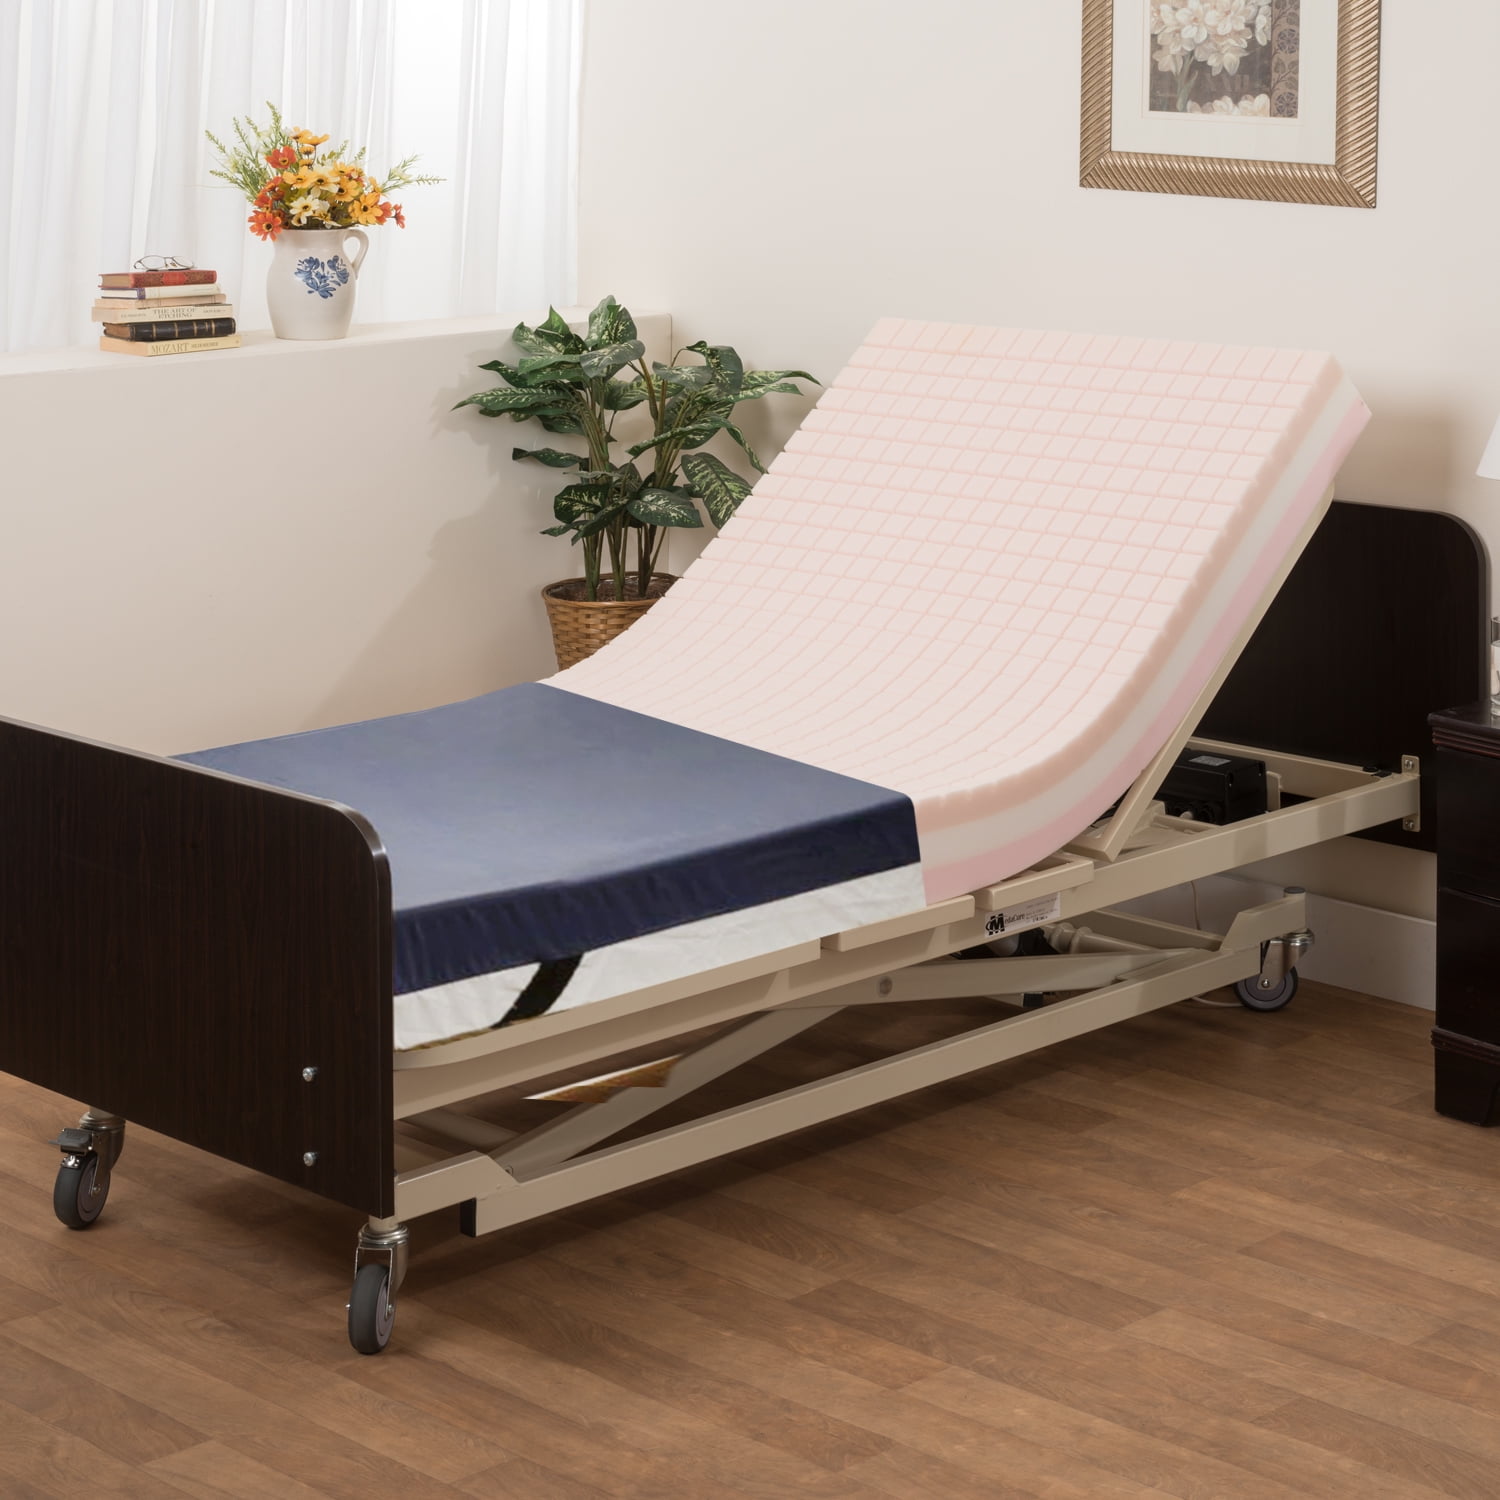 Mattress Extenders for Bed Gap Filling and Fall Prevention by Medacure